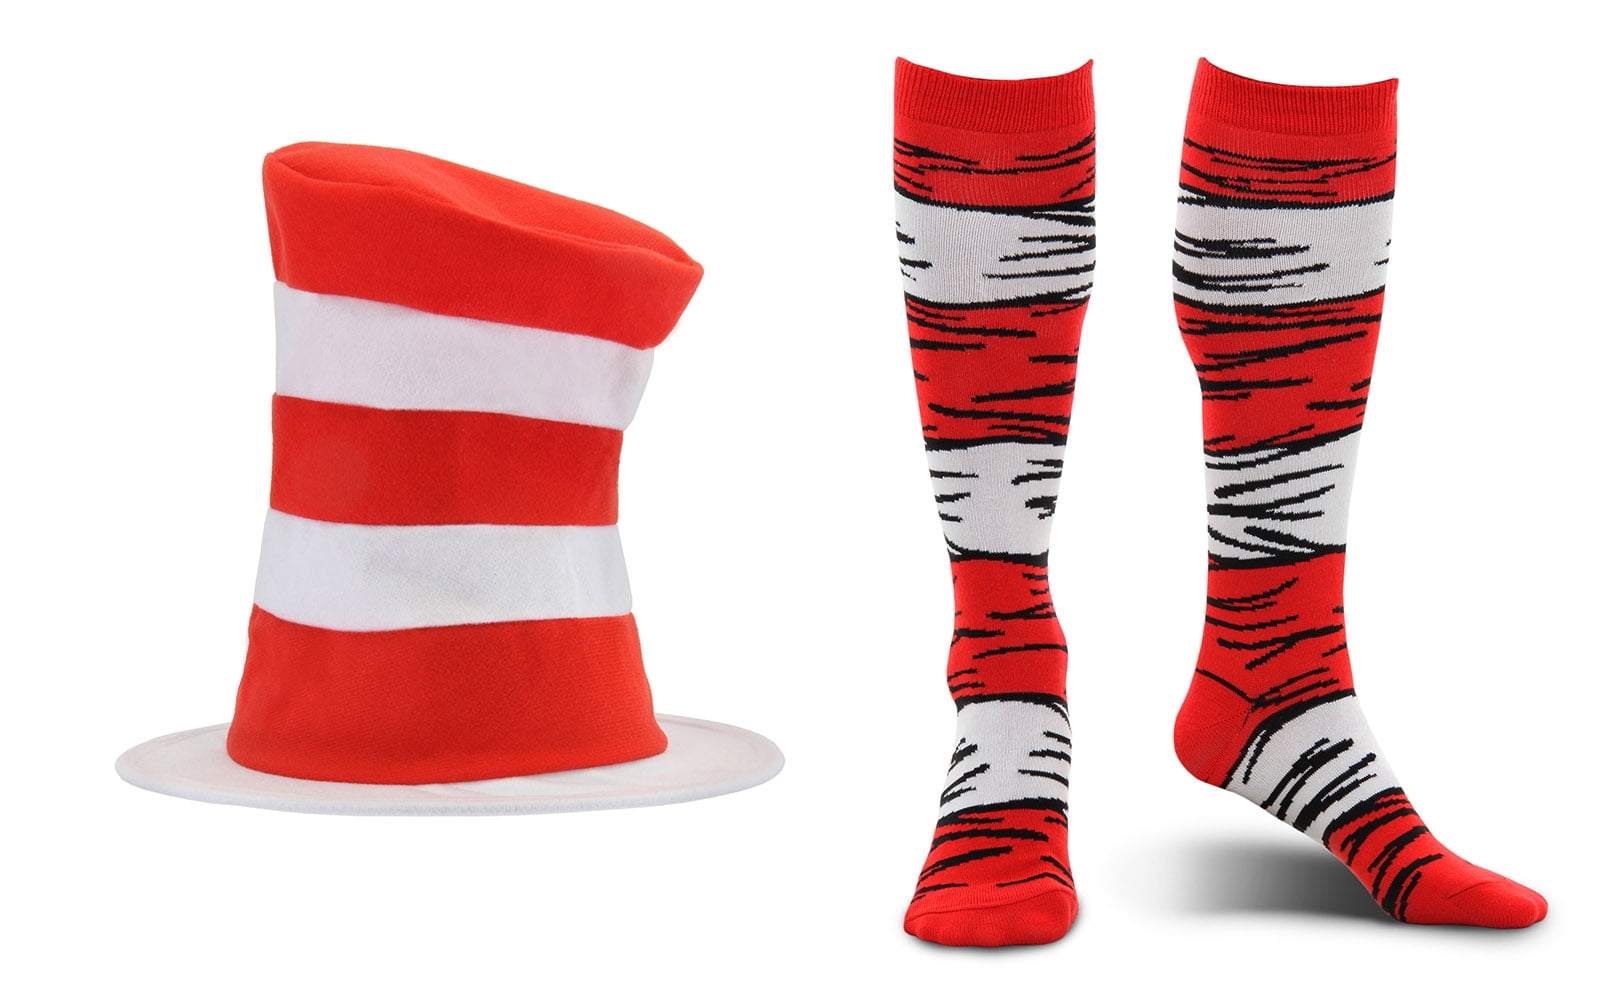 Cat in the Hat Kids Tricot Hat NEW Elope Dr Seuss 